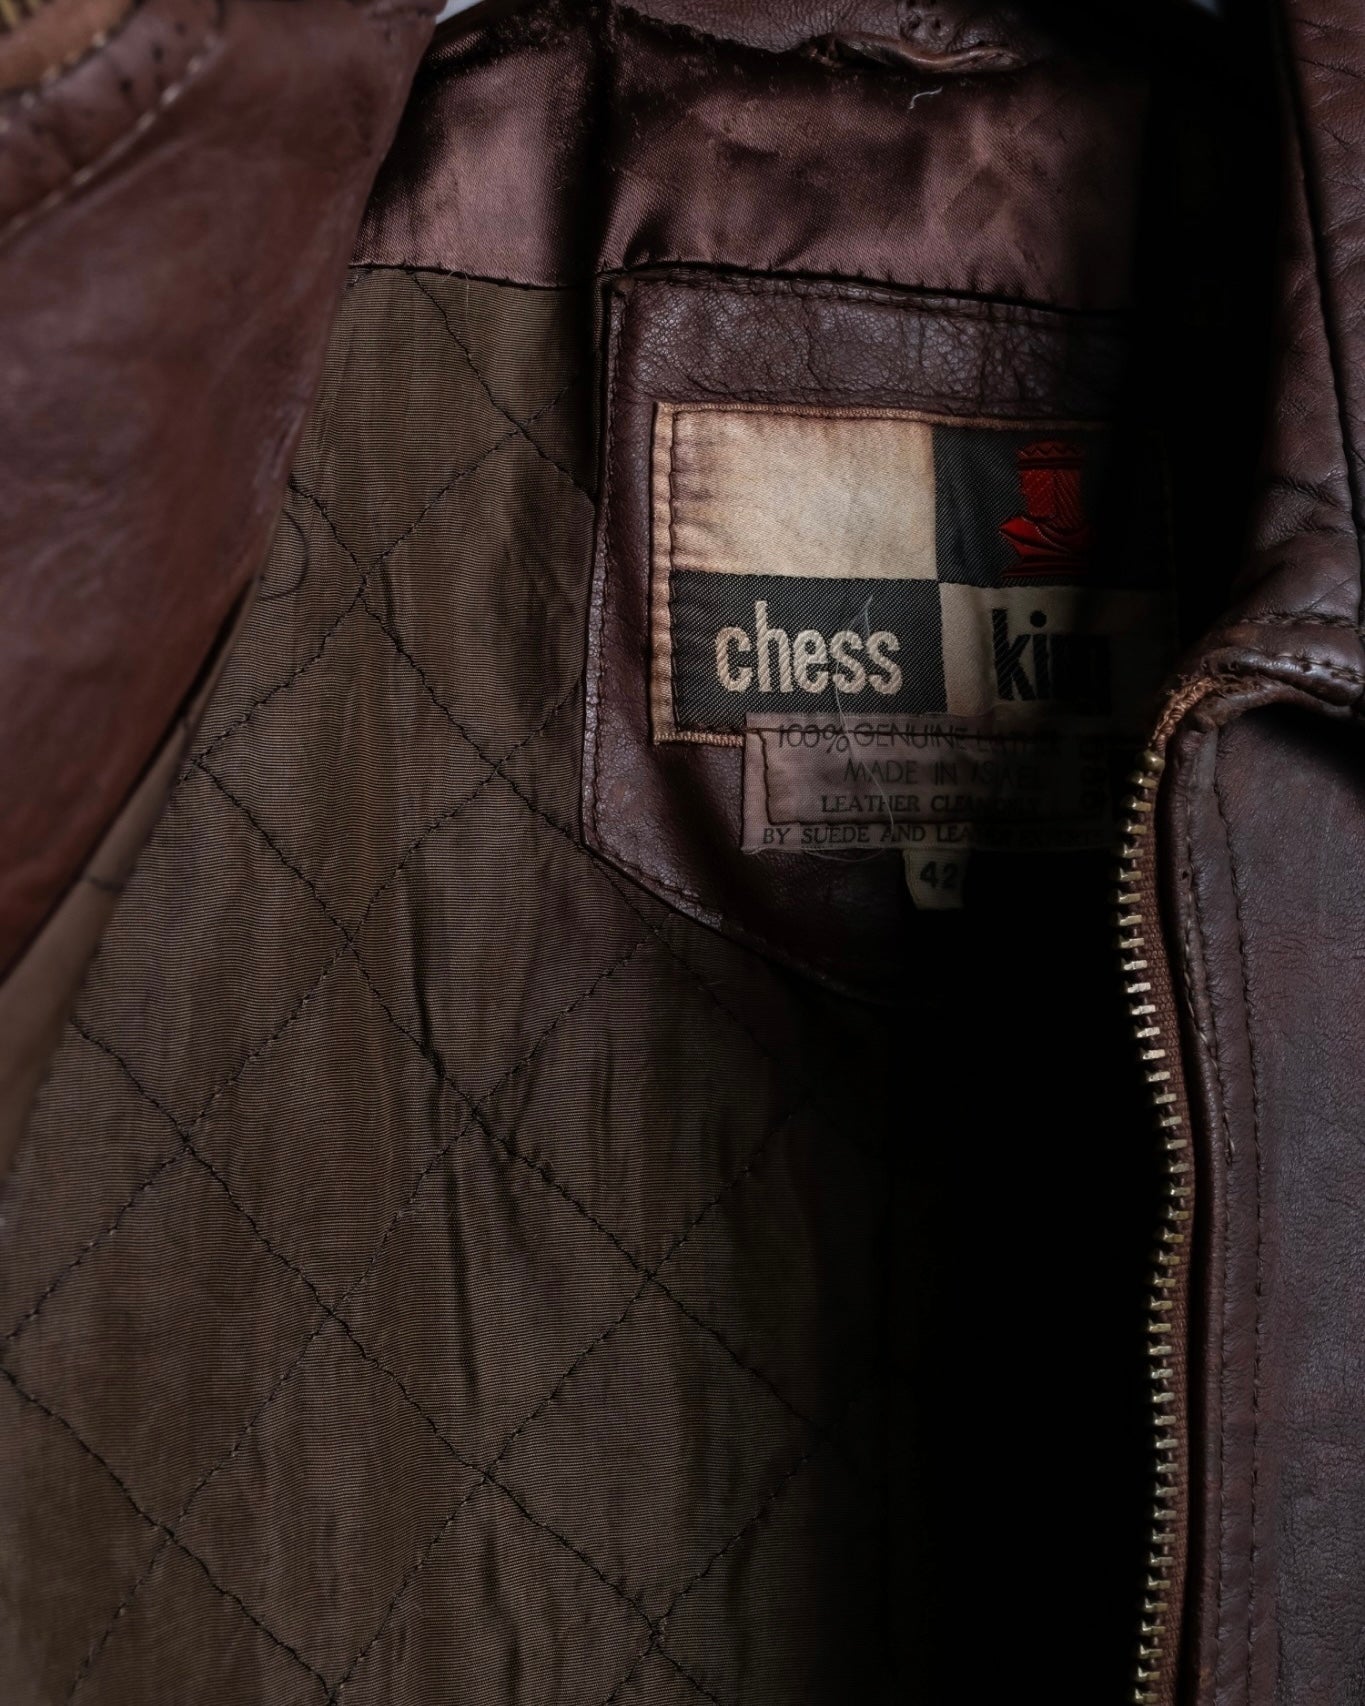 LEATHER JACKET All About Vintage Leathe… 最大68%OFFクーポン - 住まい